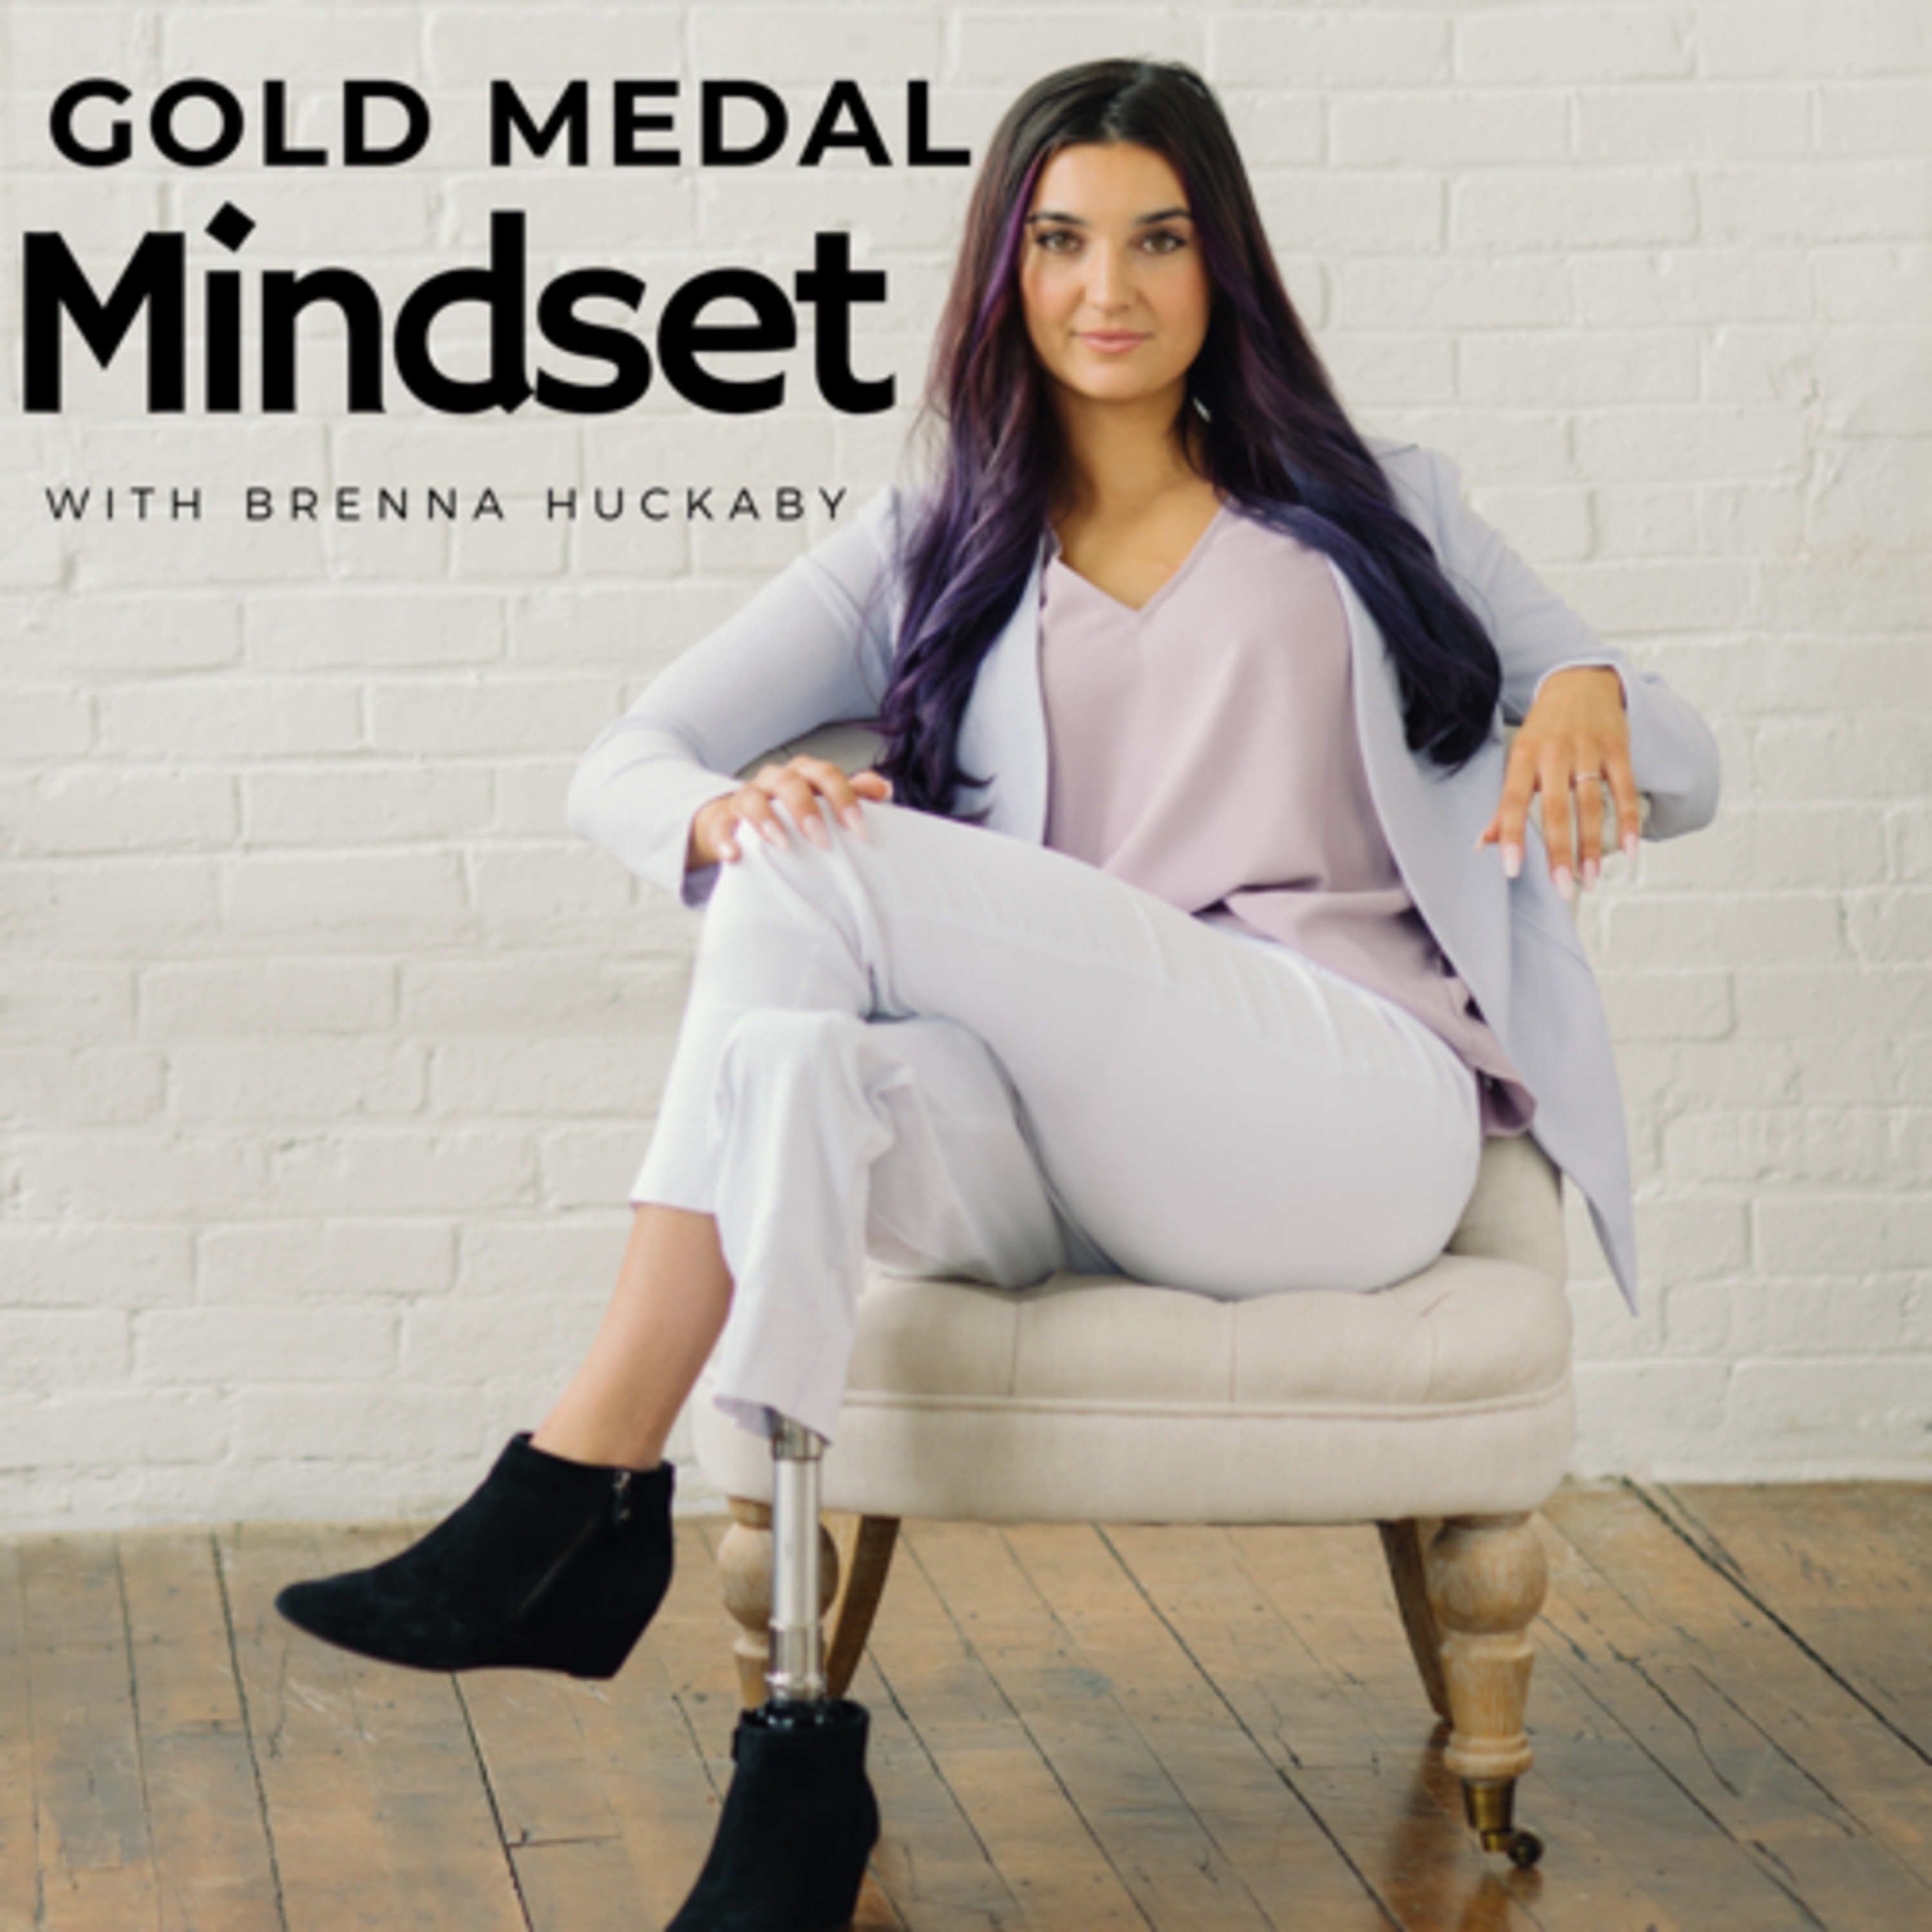 Gold Medal Mindset with Brenna Huckaby